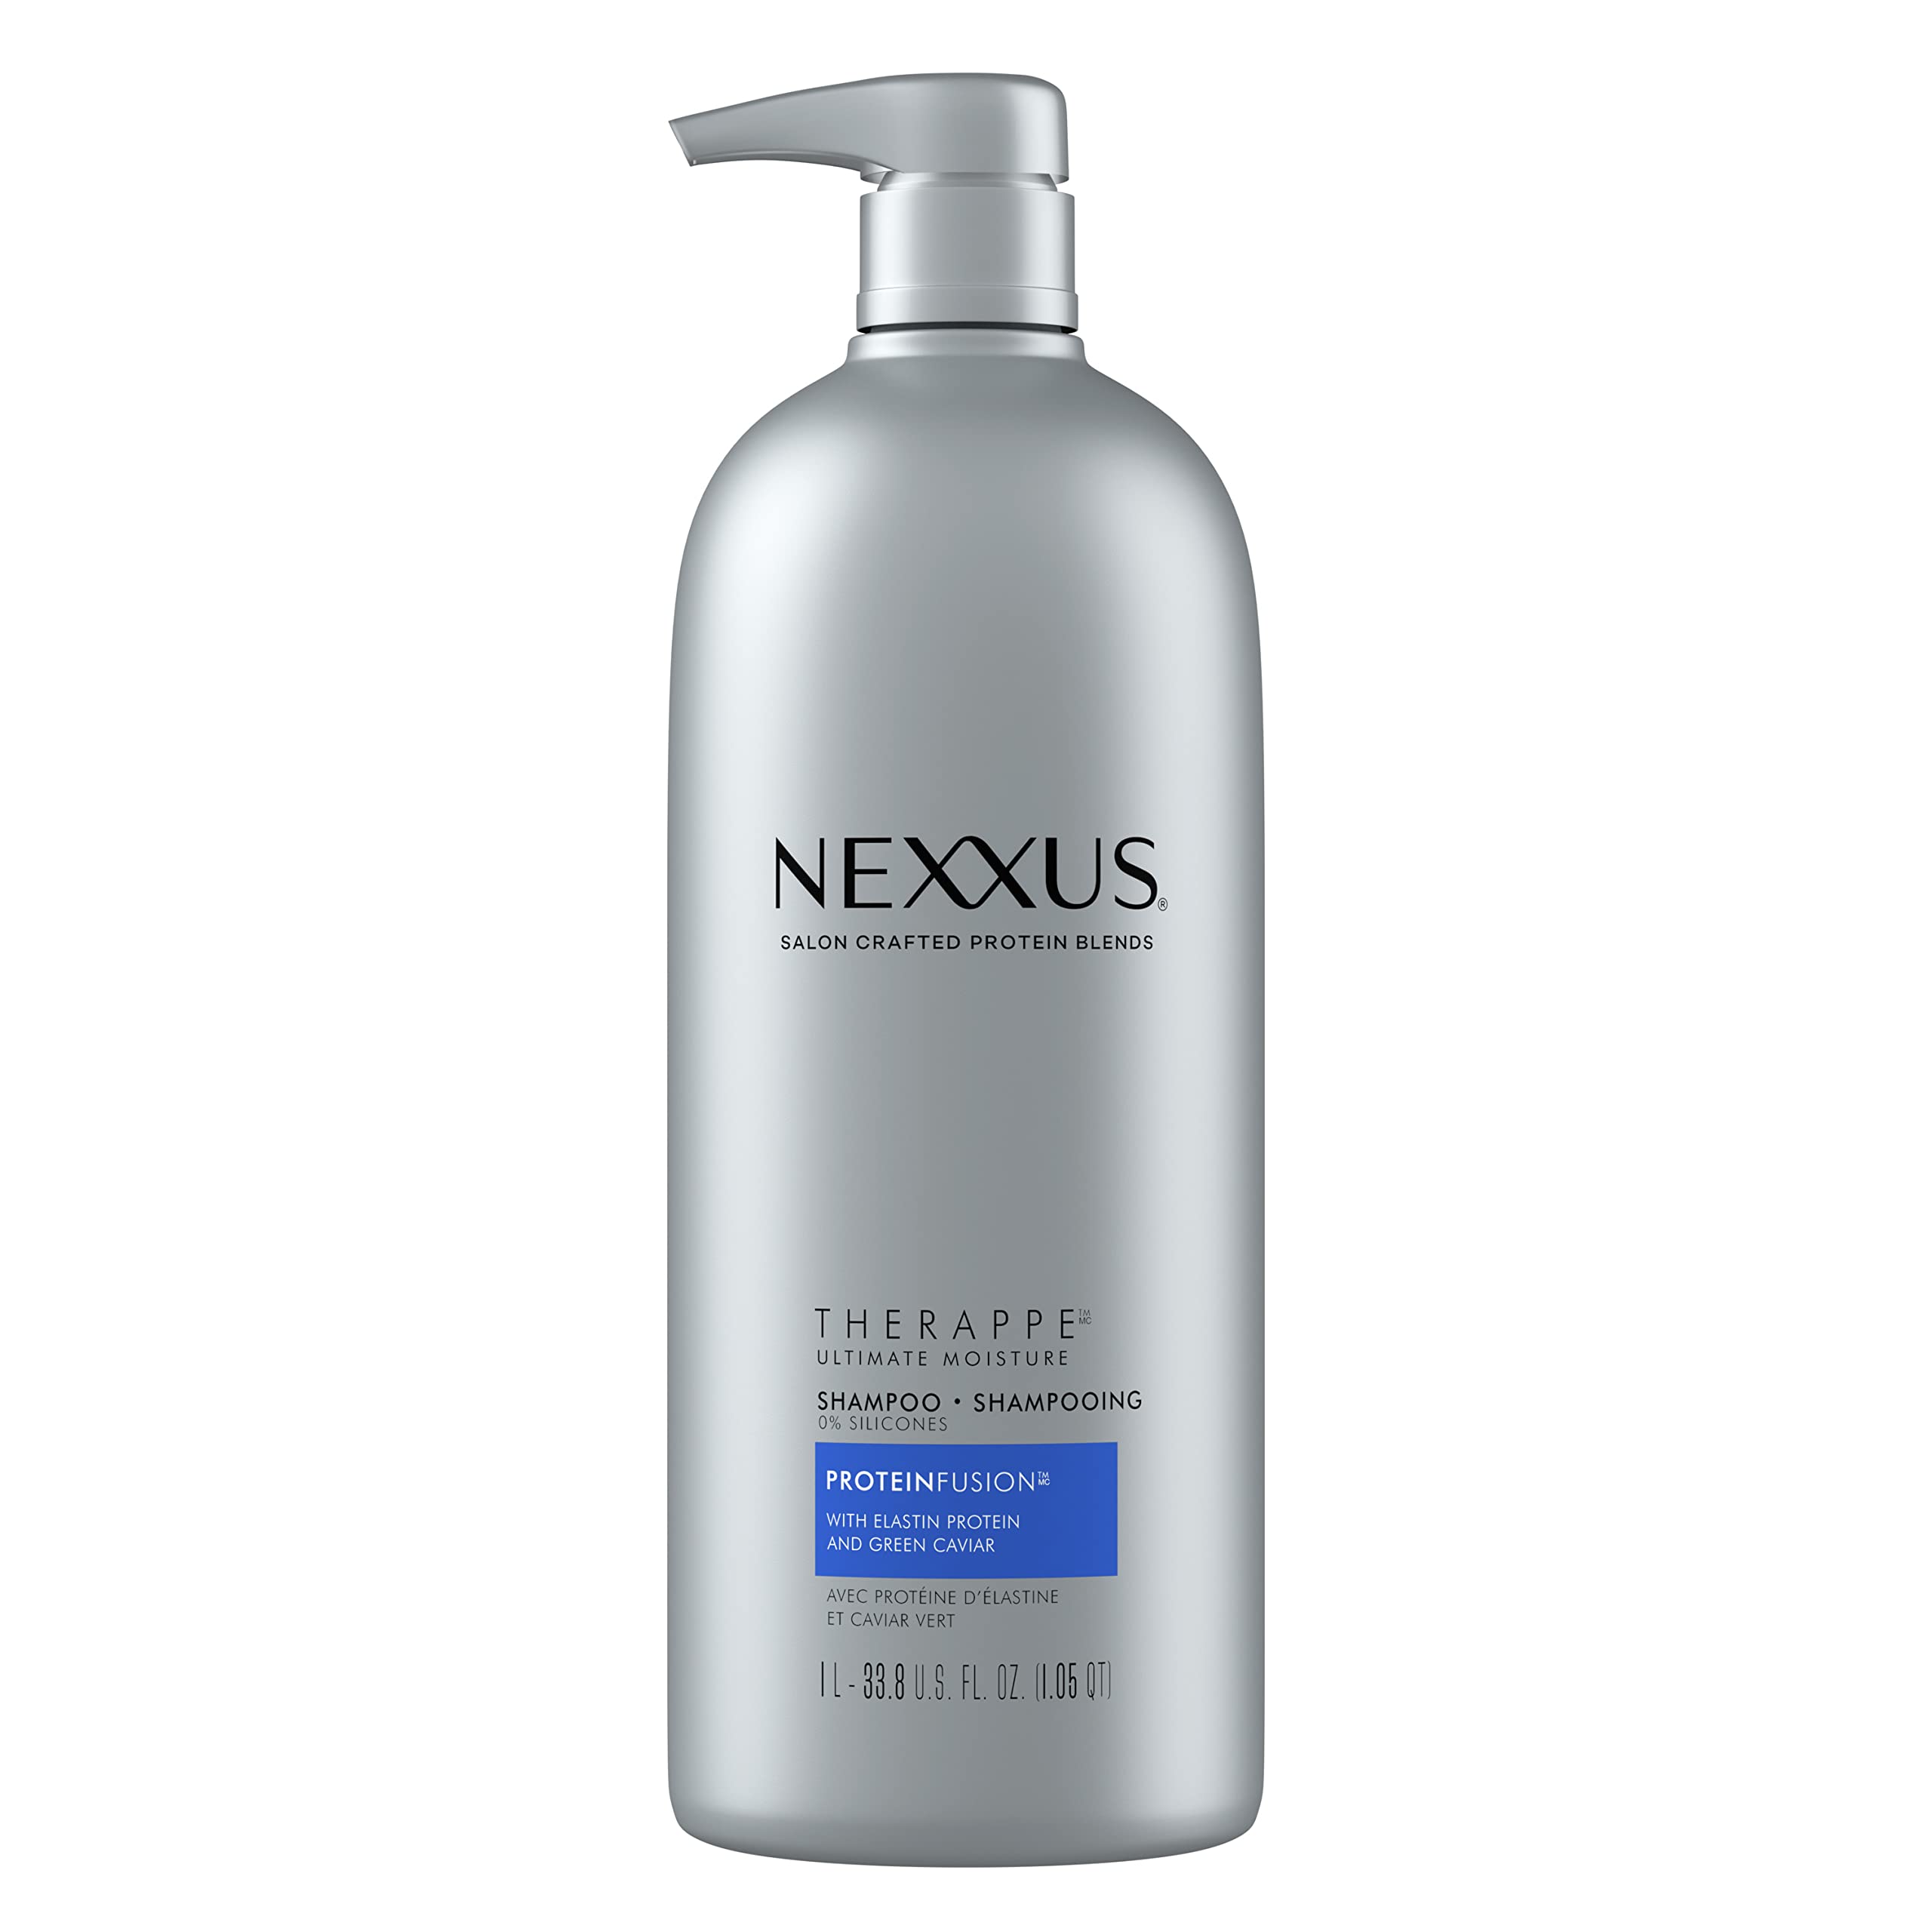 Nexxus Therappe Moisturizing Shampoo Ultimate Moisture for Dry Hair Silicone-Free, Moisturizing ProteinFusion with Elastin Protein and Green Caviar 33.8 oz